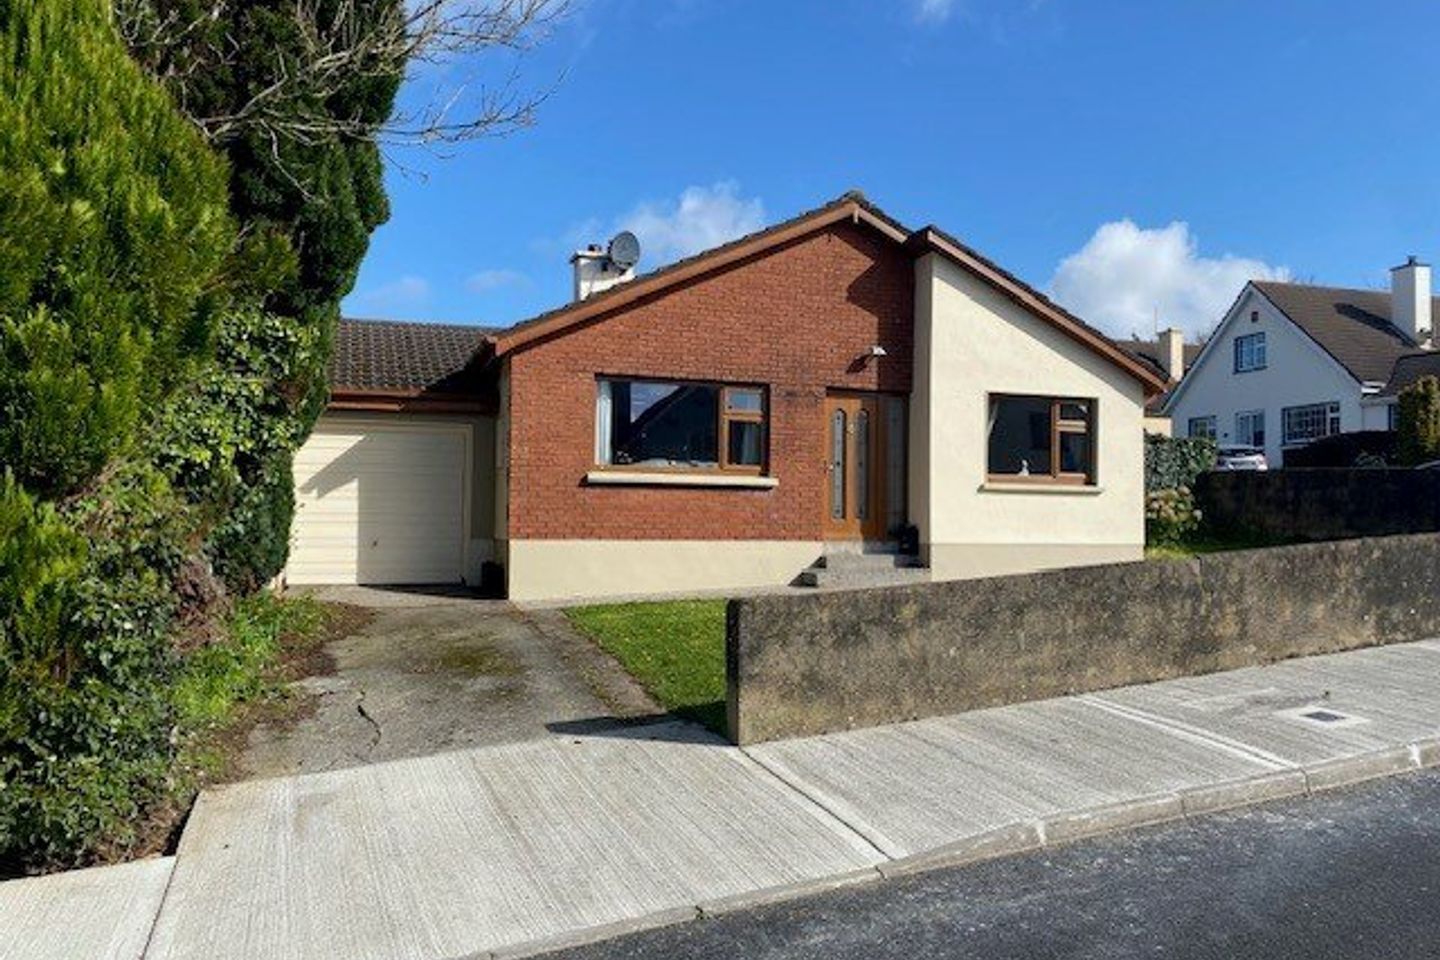 33 Riverview, New Ross, Co. Wexford, Y34X992